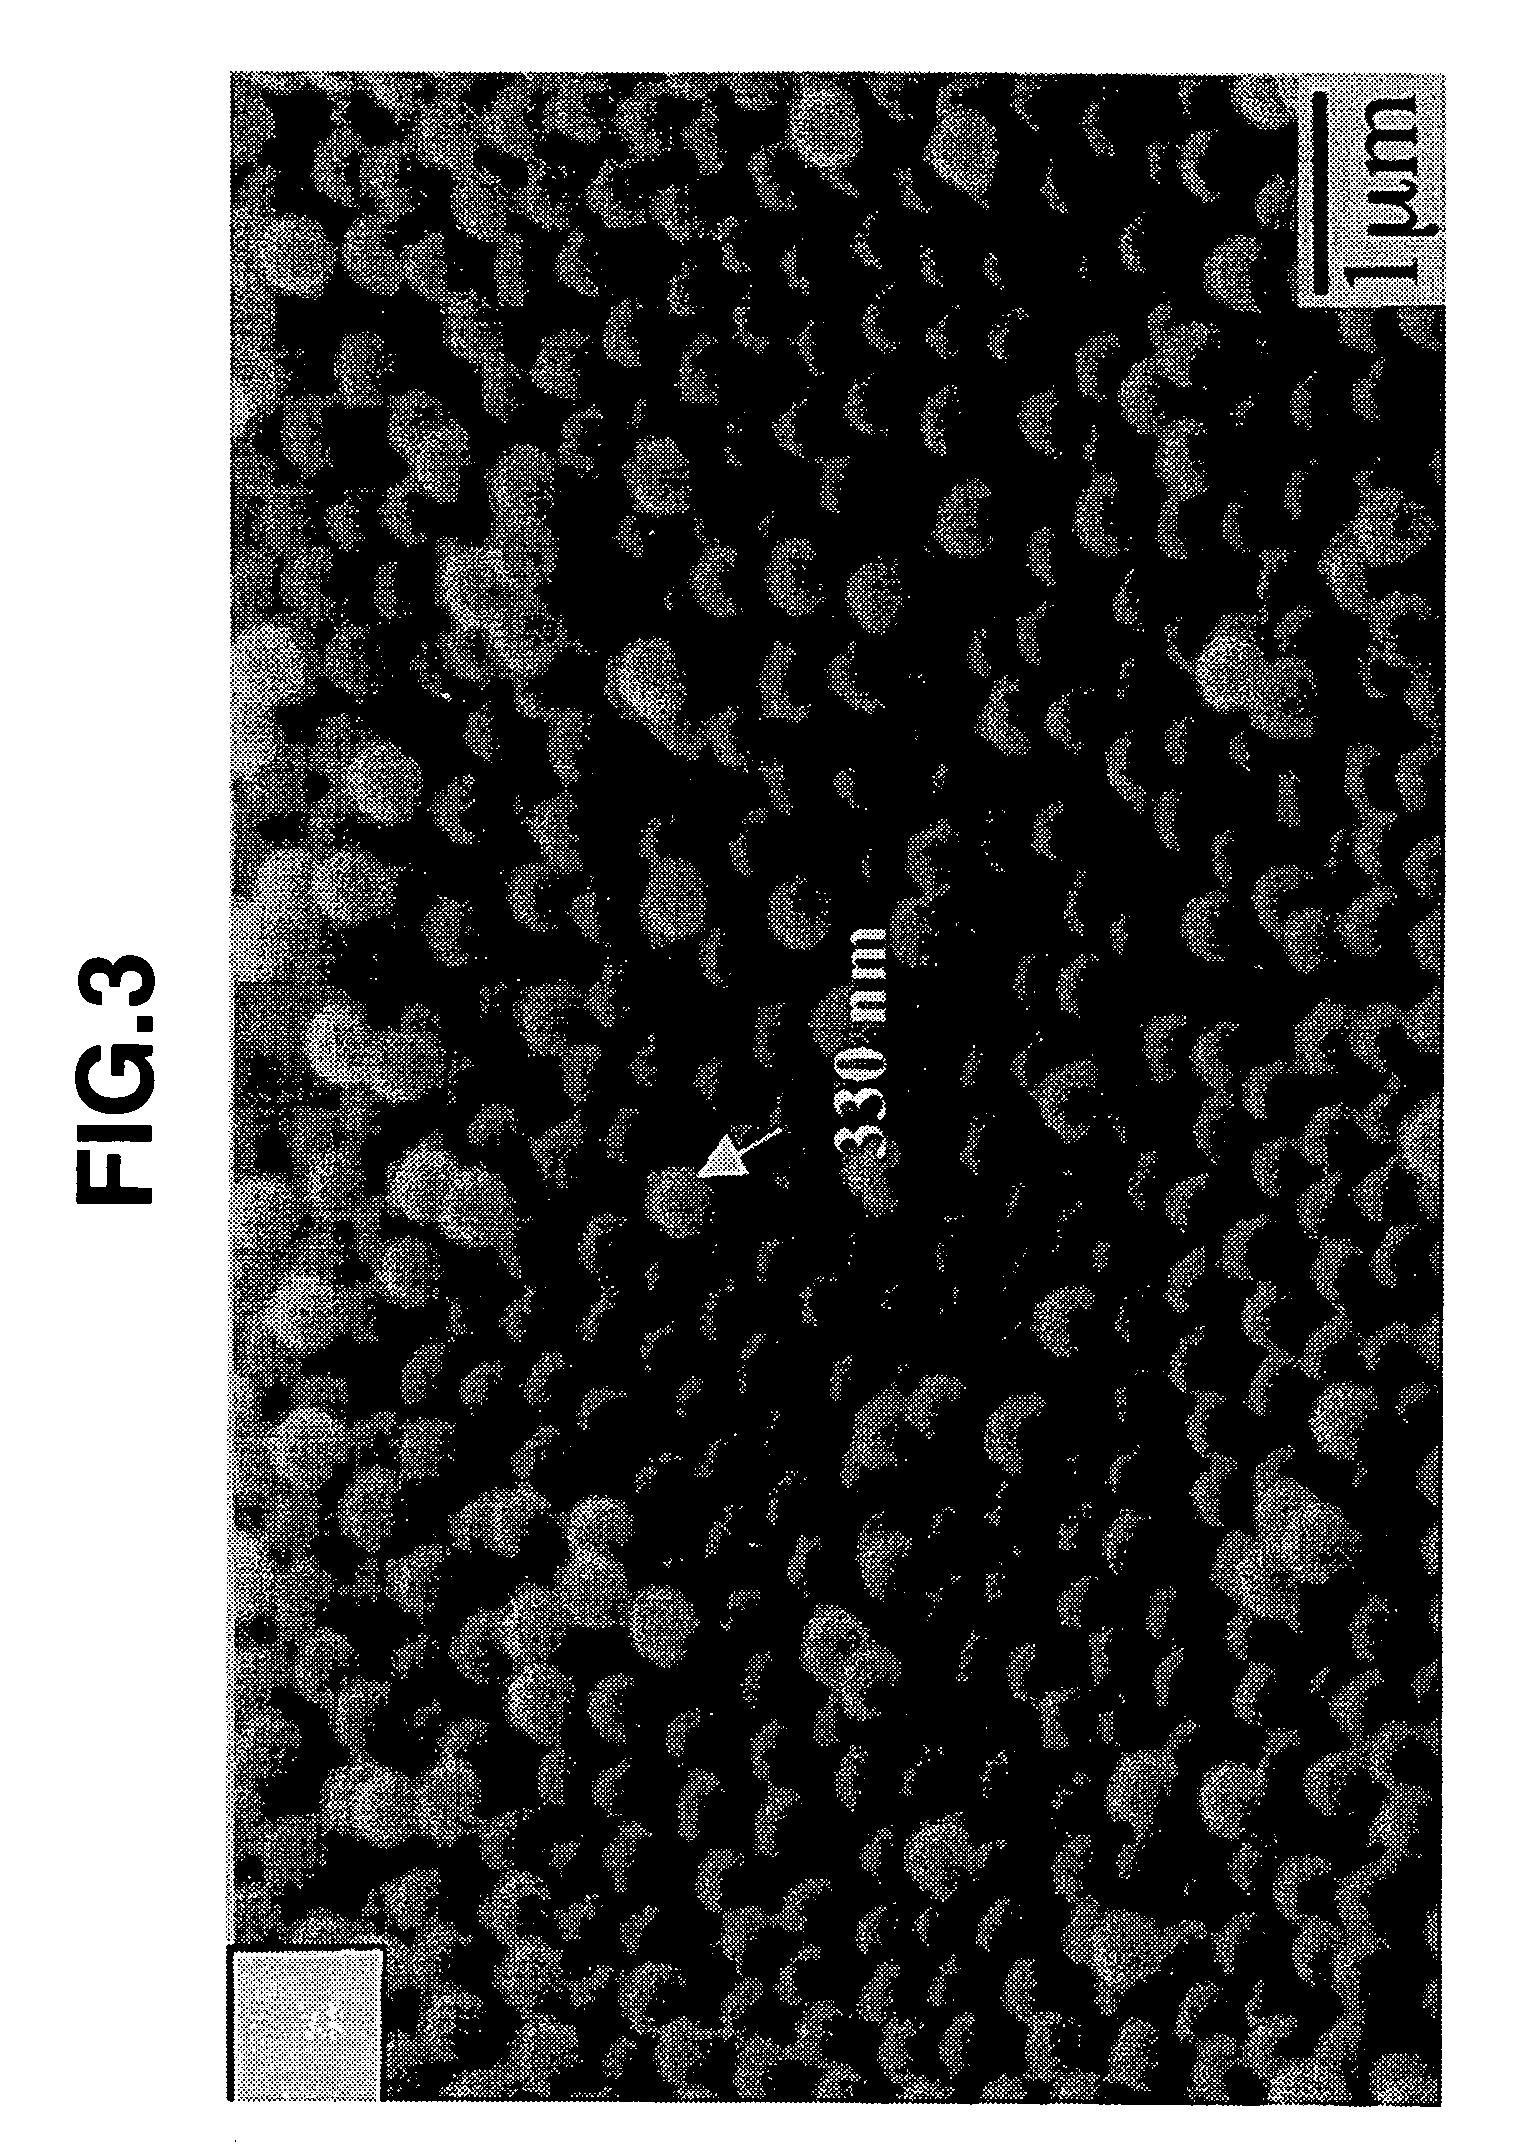 Carbon nanotube and process for producing the same